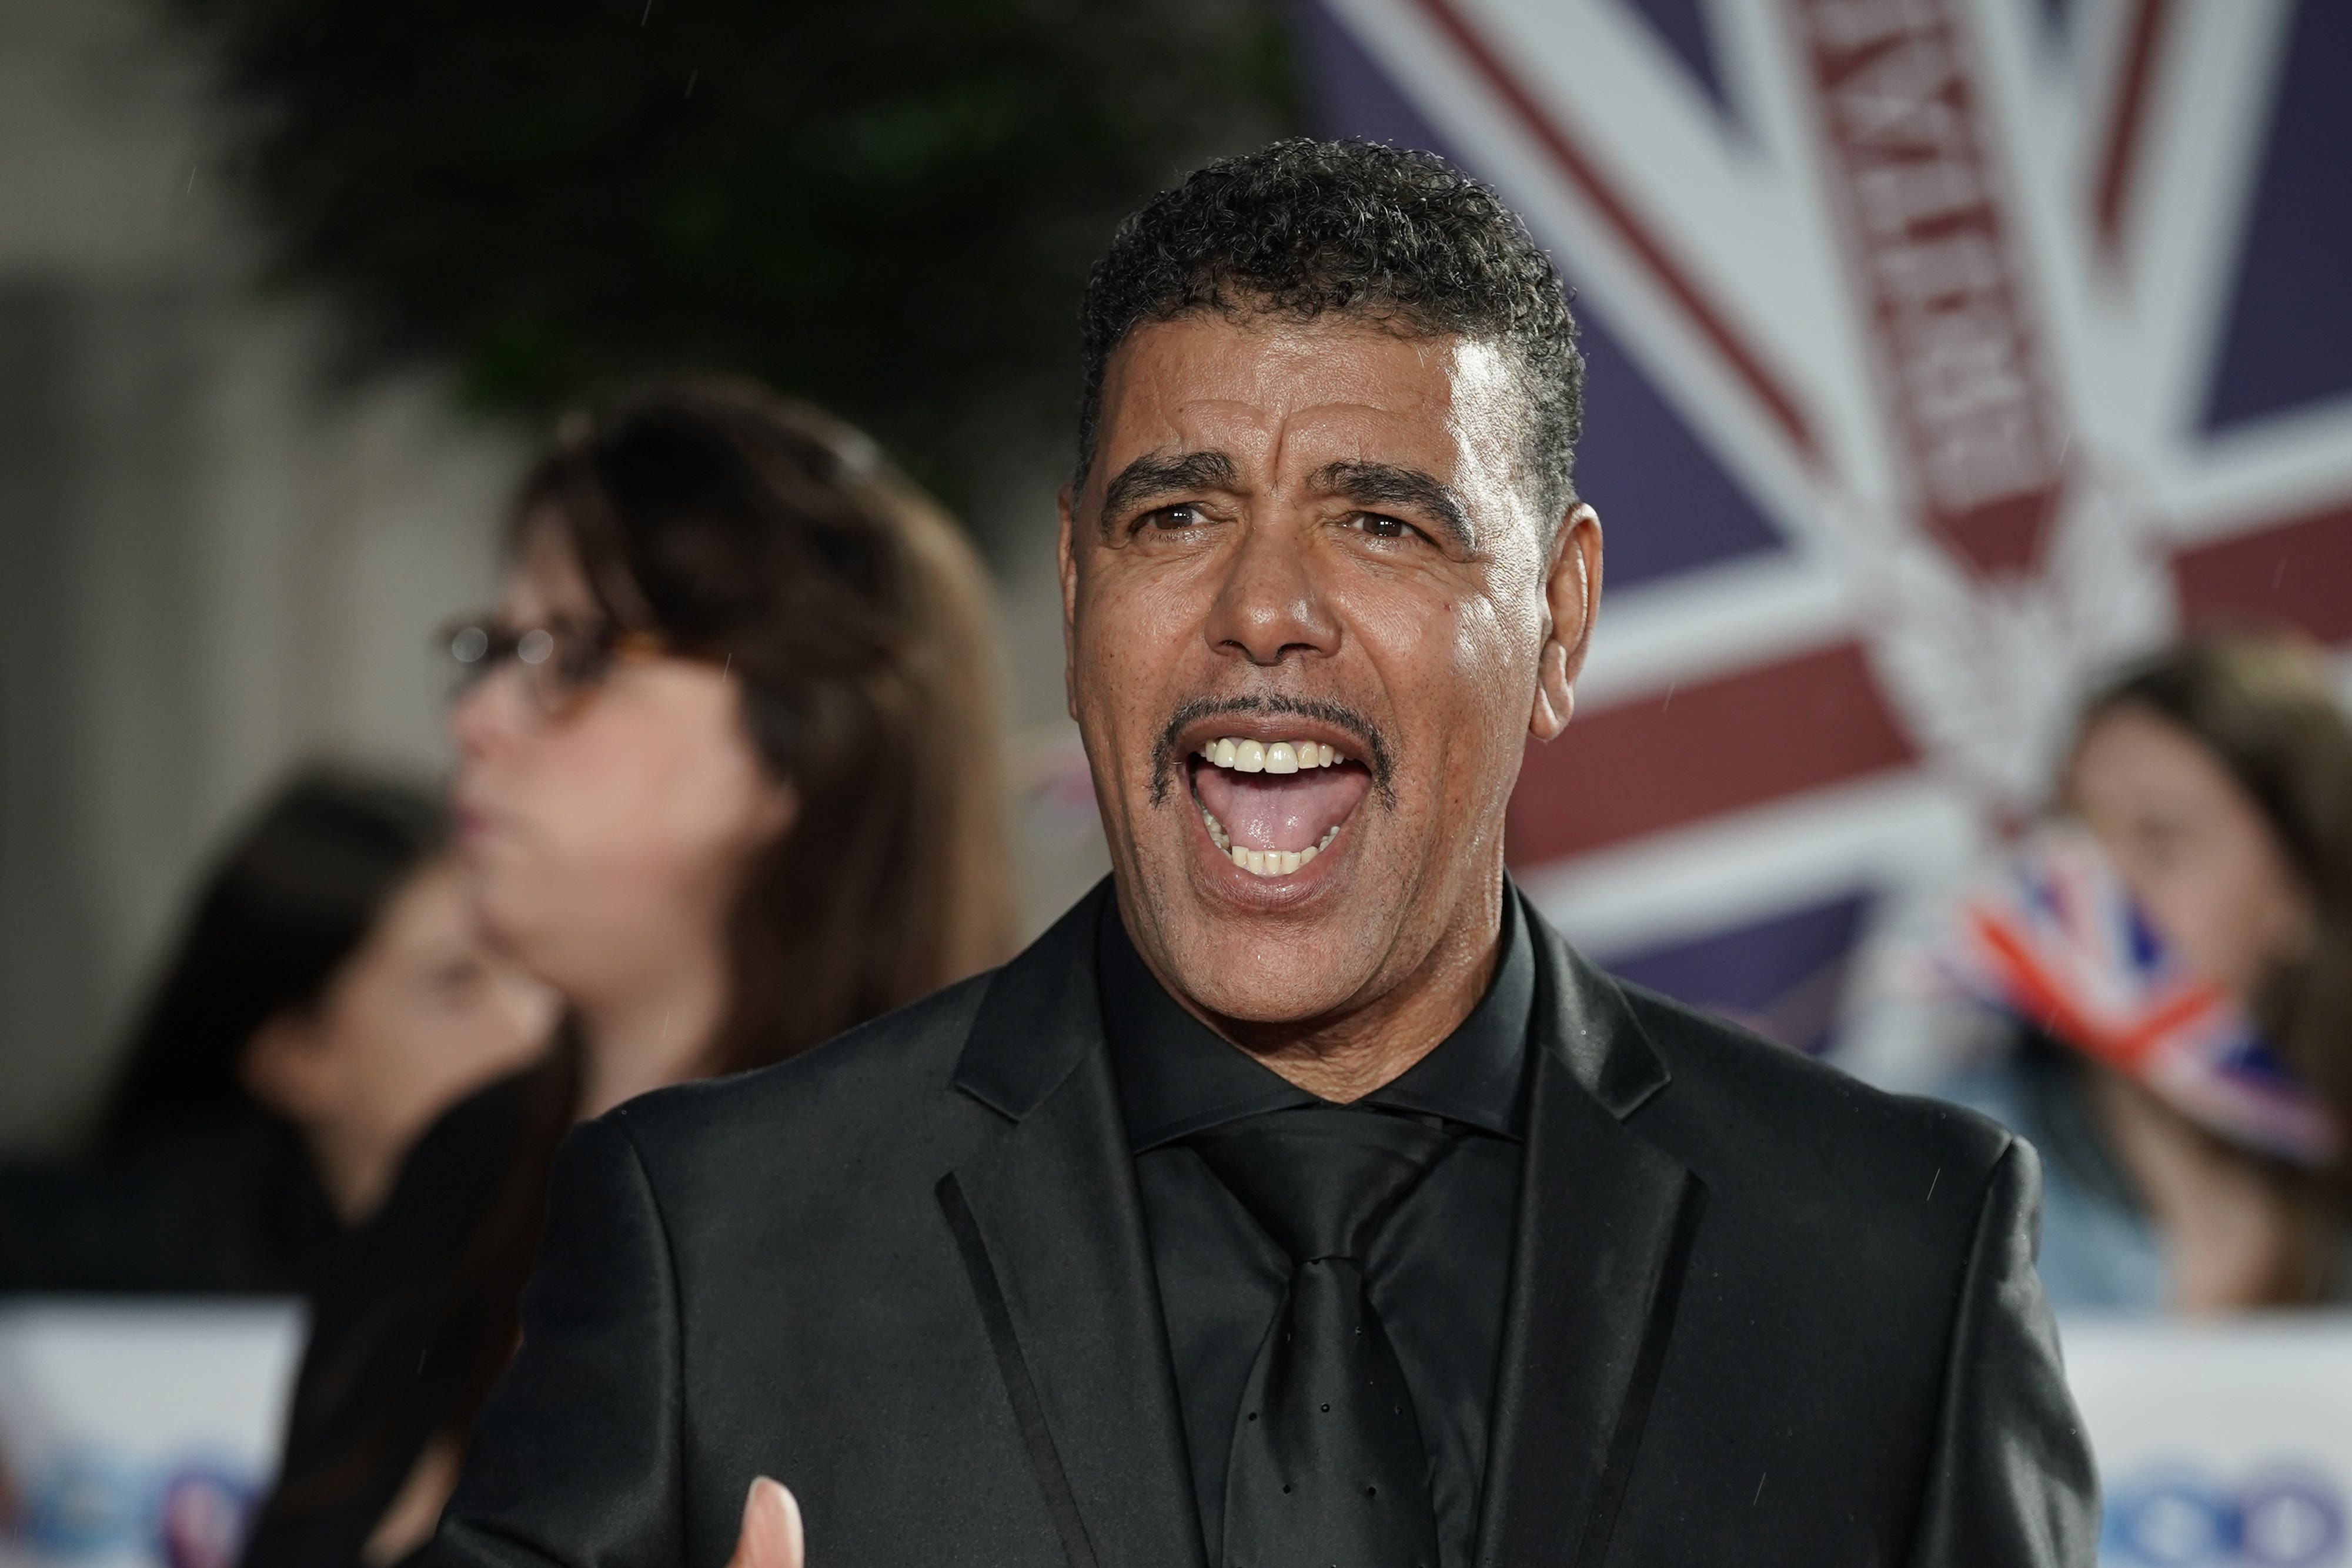 Chris Kamara, one of football’s most popular figures, will receive an honour at Windsor Castle on Tuesday (Yui Mok/PA)